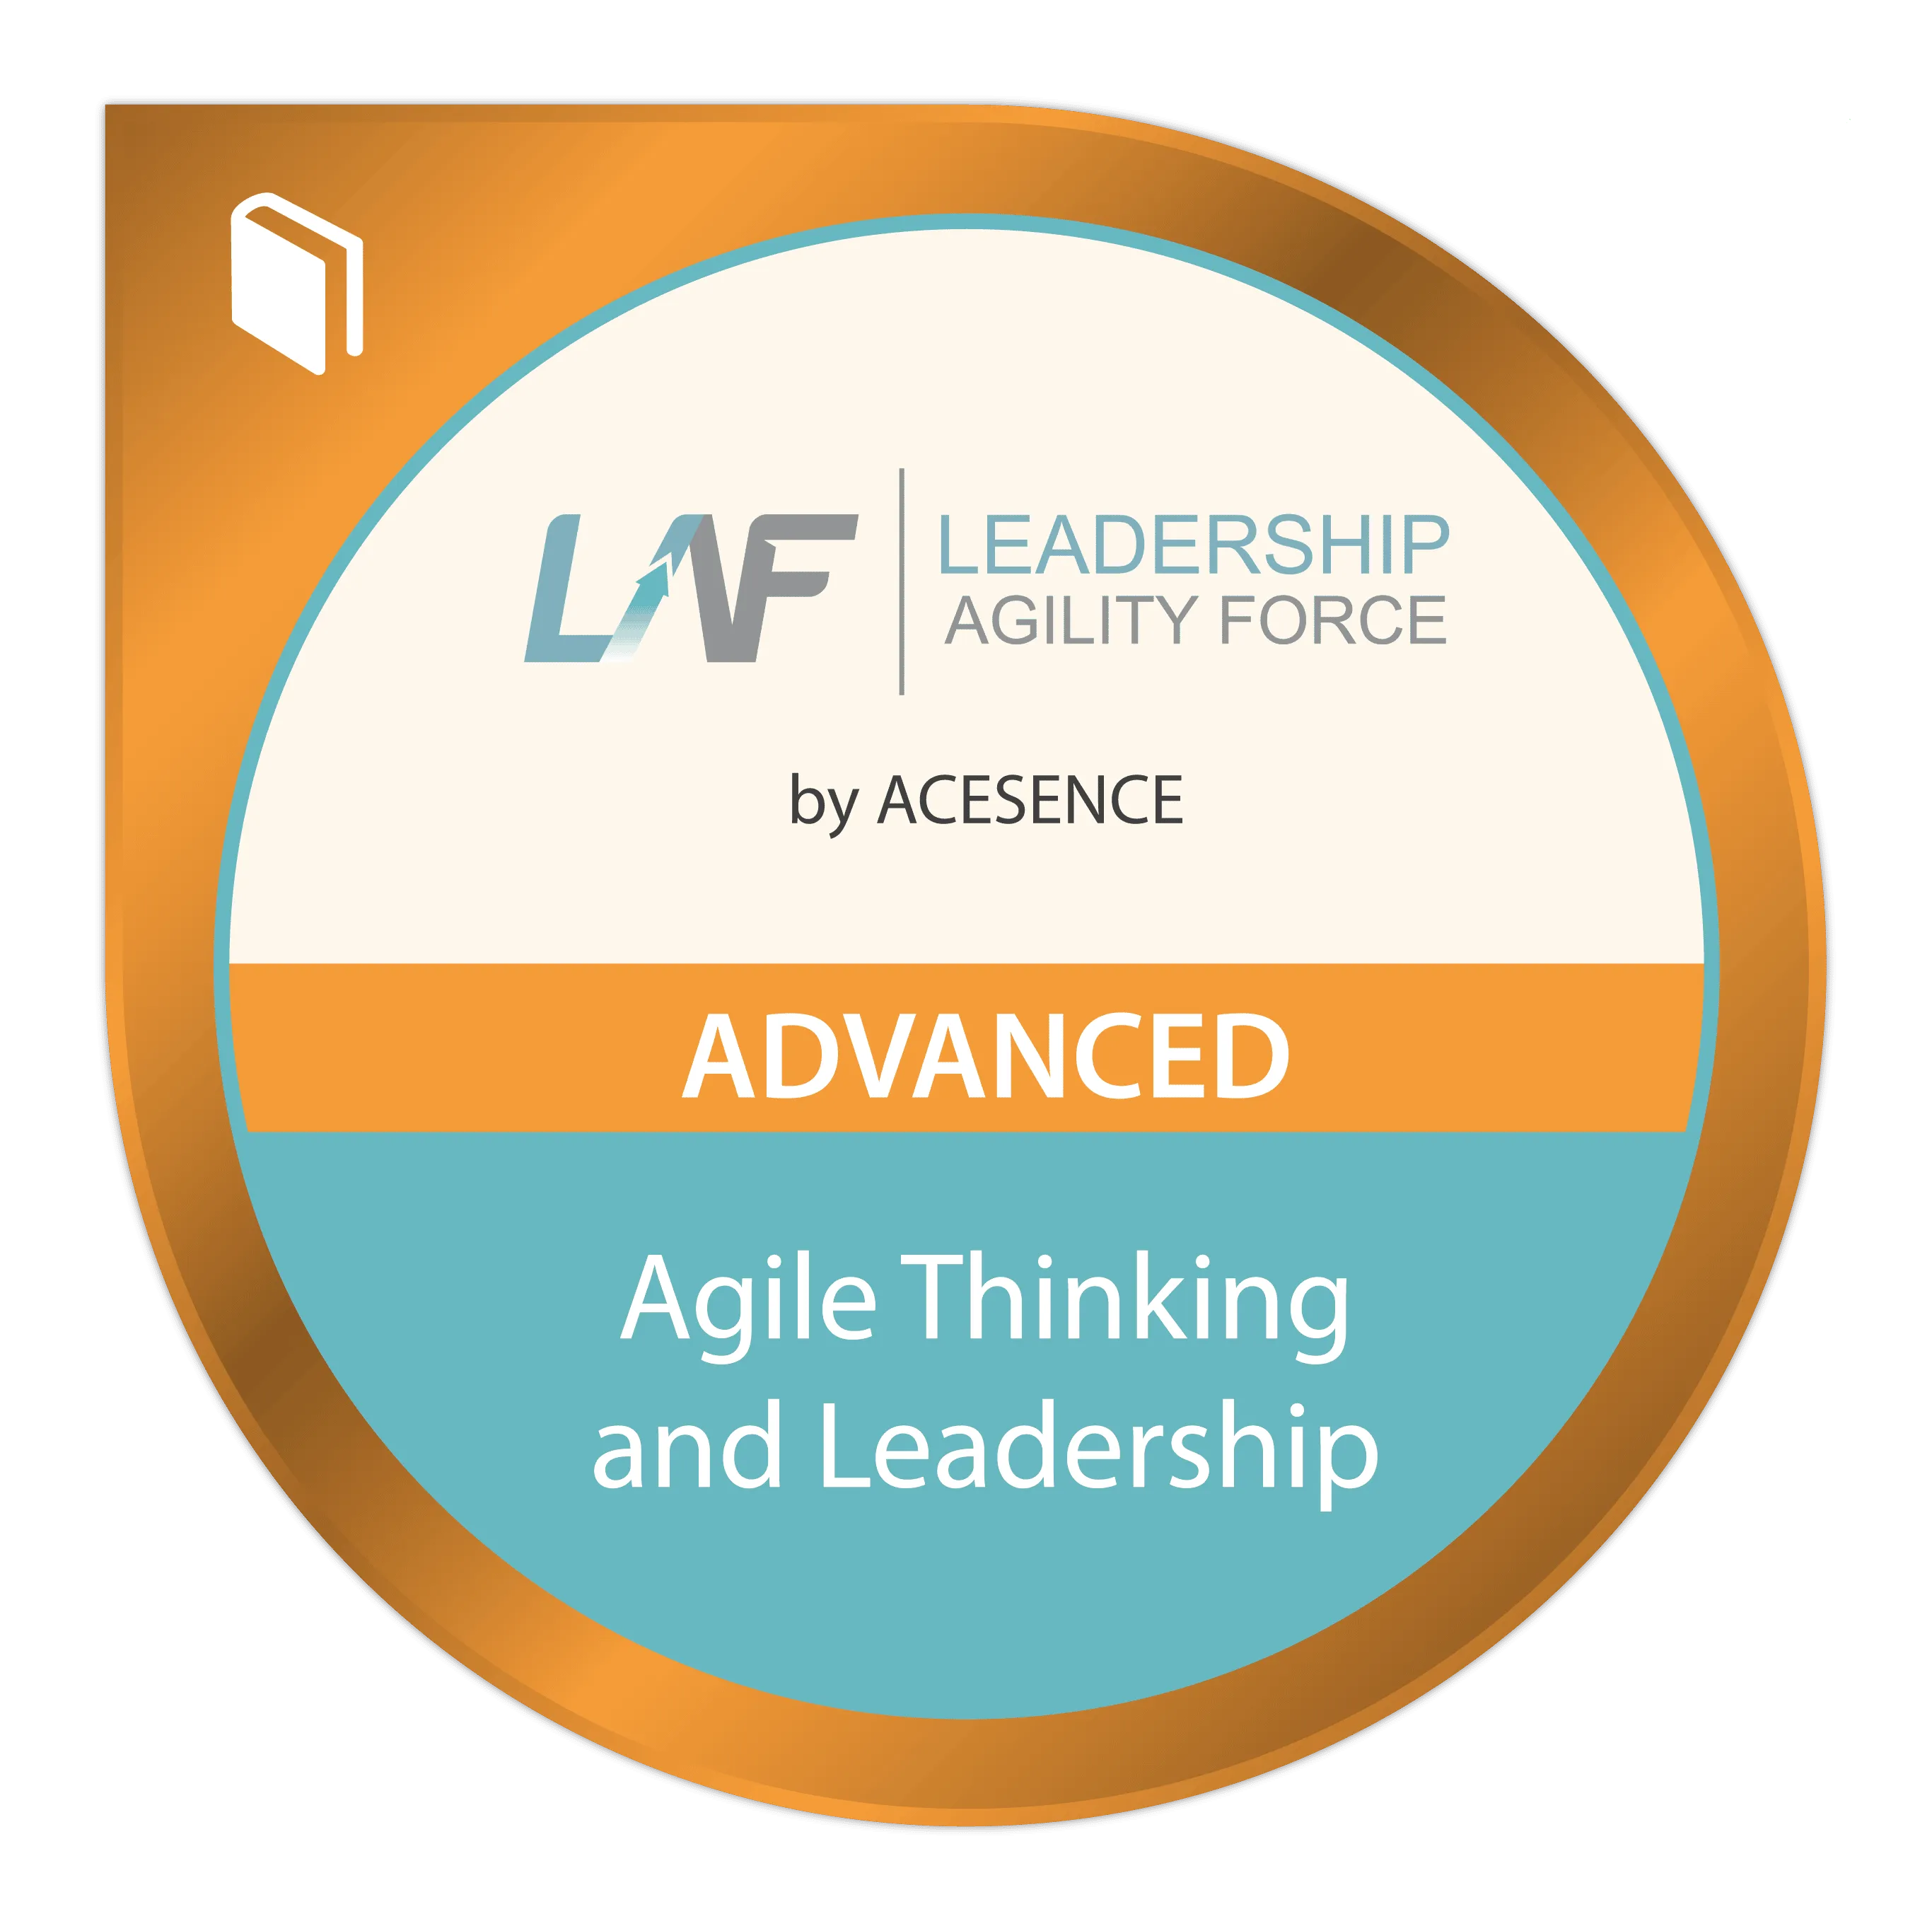 Agile Thinking and Leadership Advanced Credential